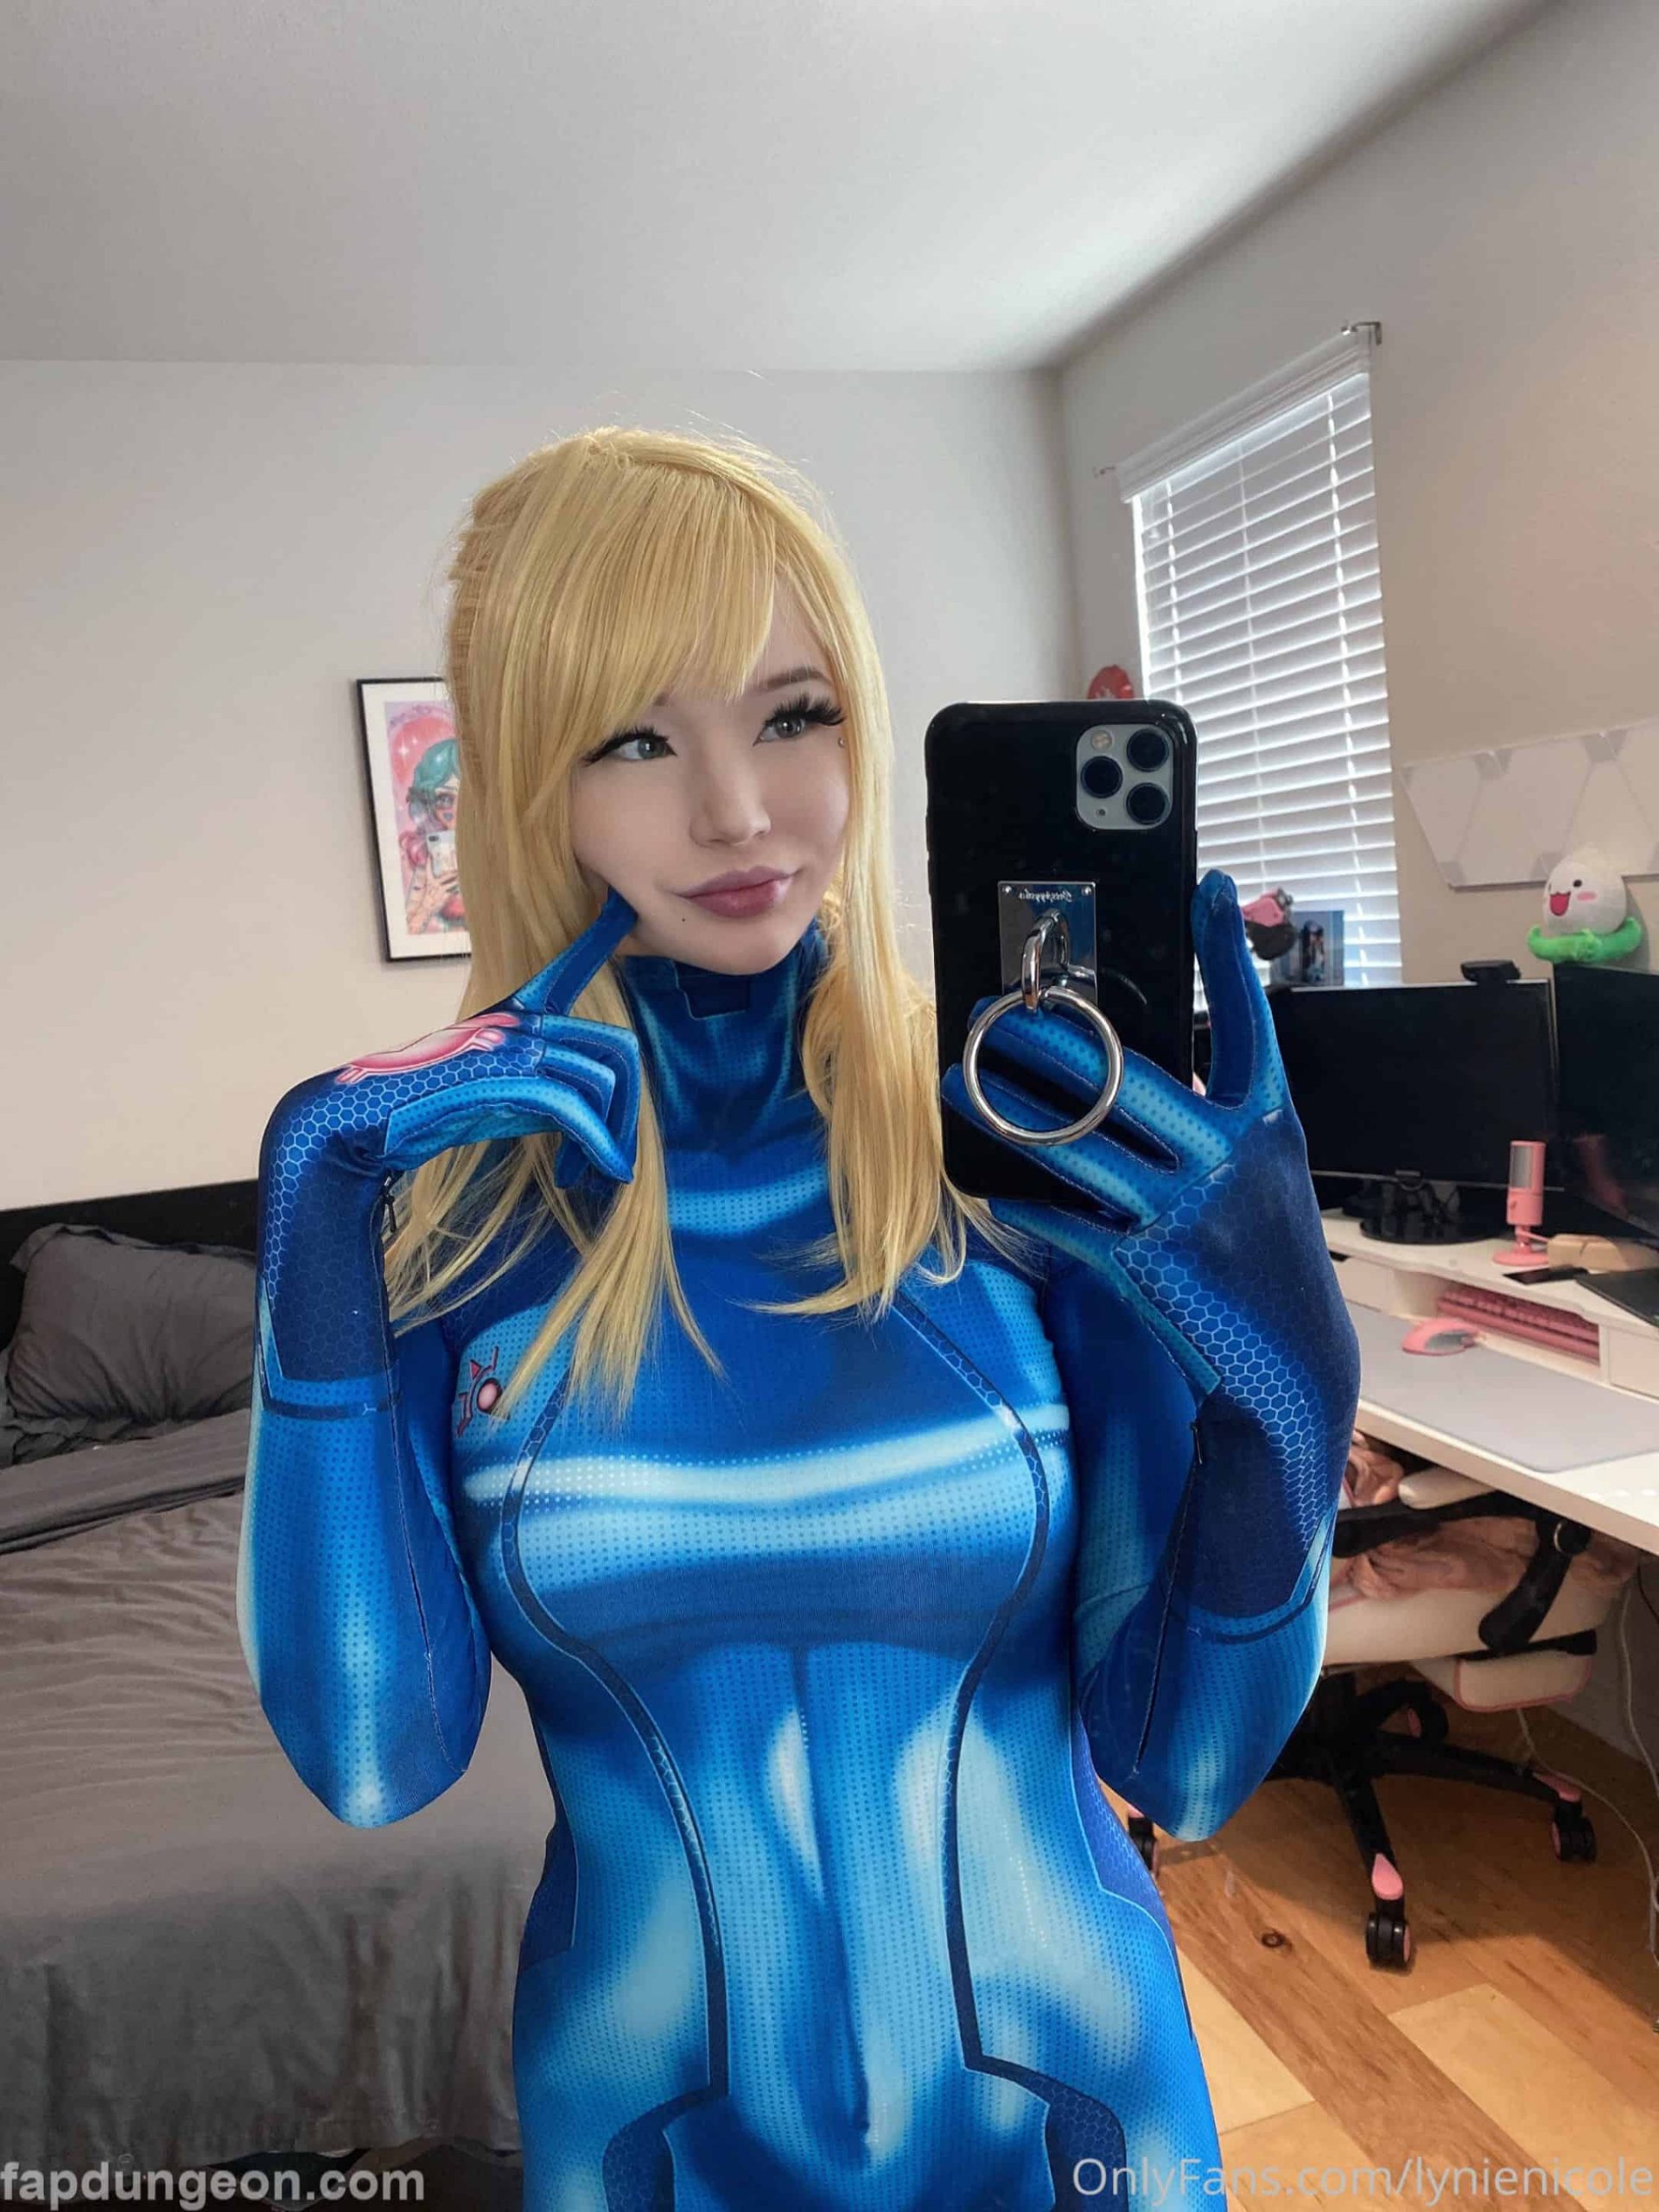 Lynie - Cosplay Onlyfans Thot Nudes - fapdungeon.com 26. 